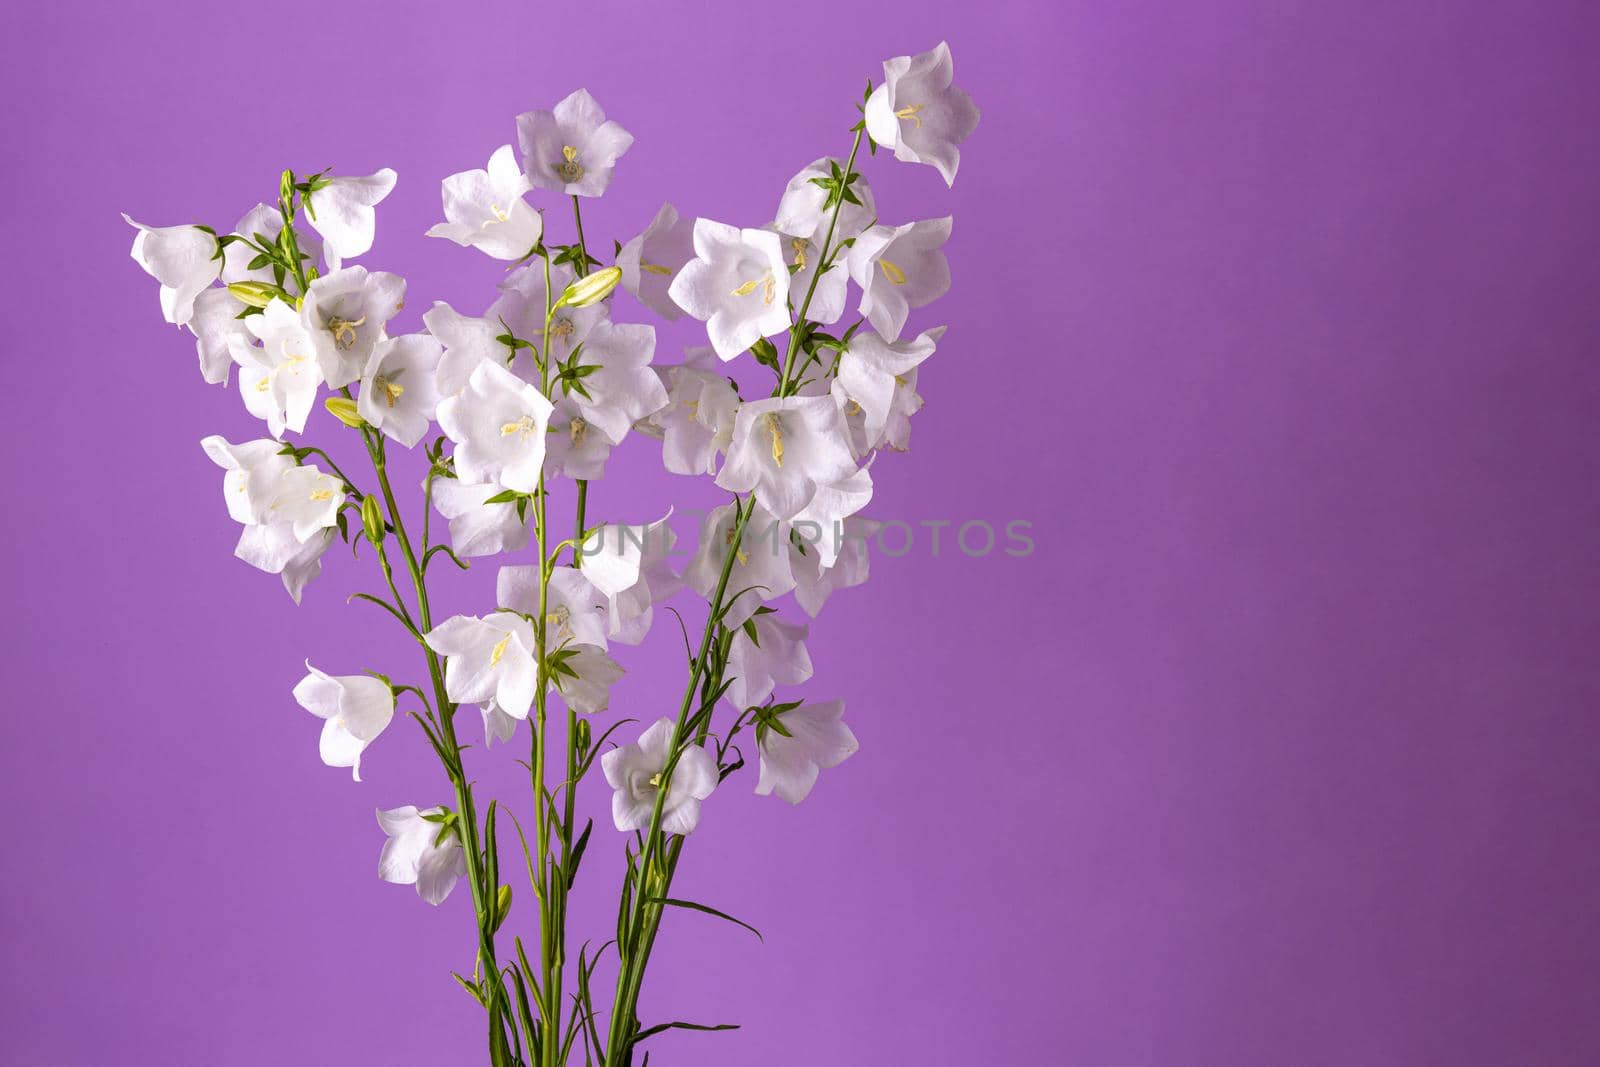 Bouquet of flowers bells on a purple background by Madhourse